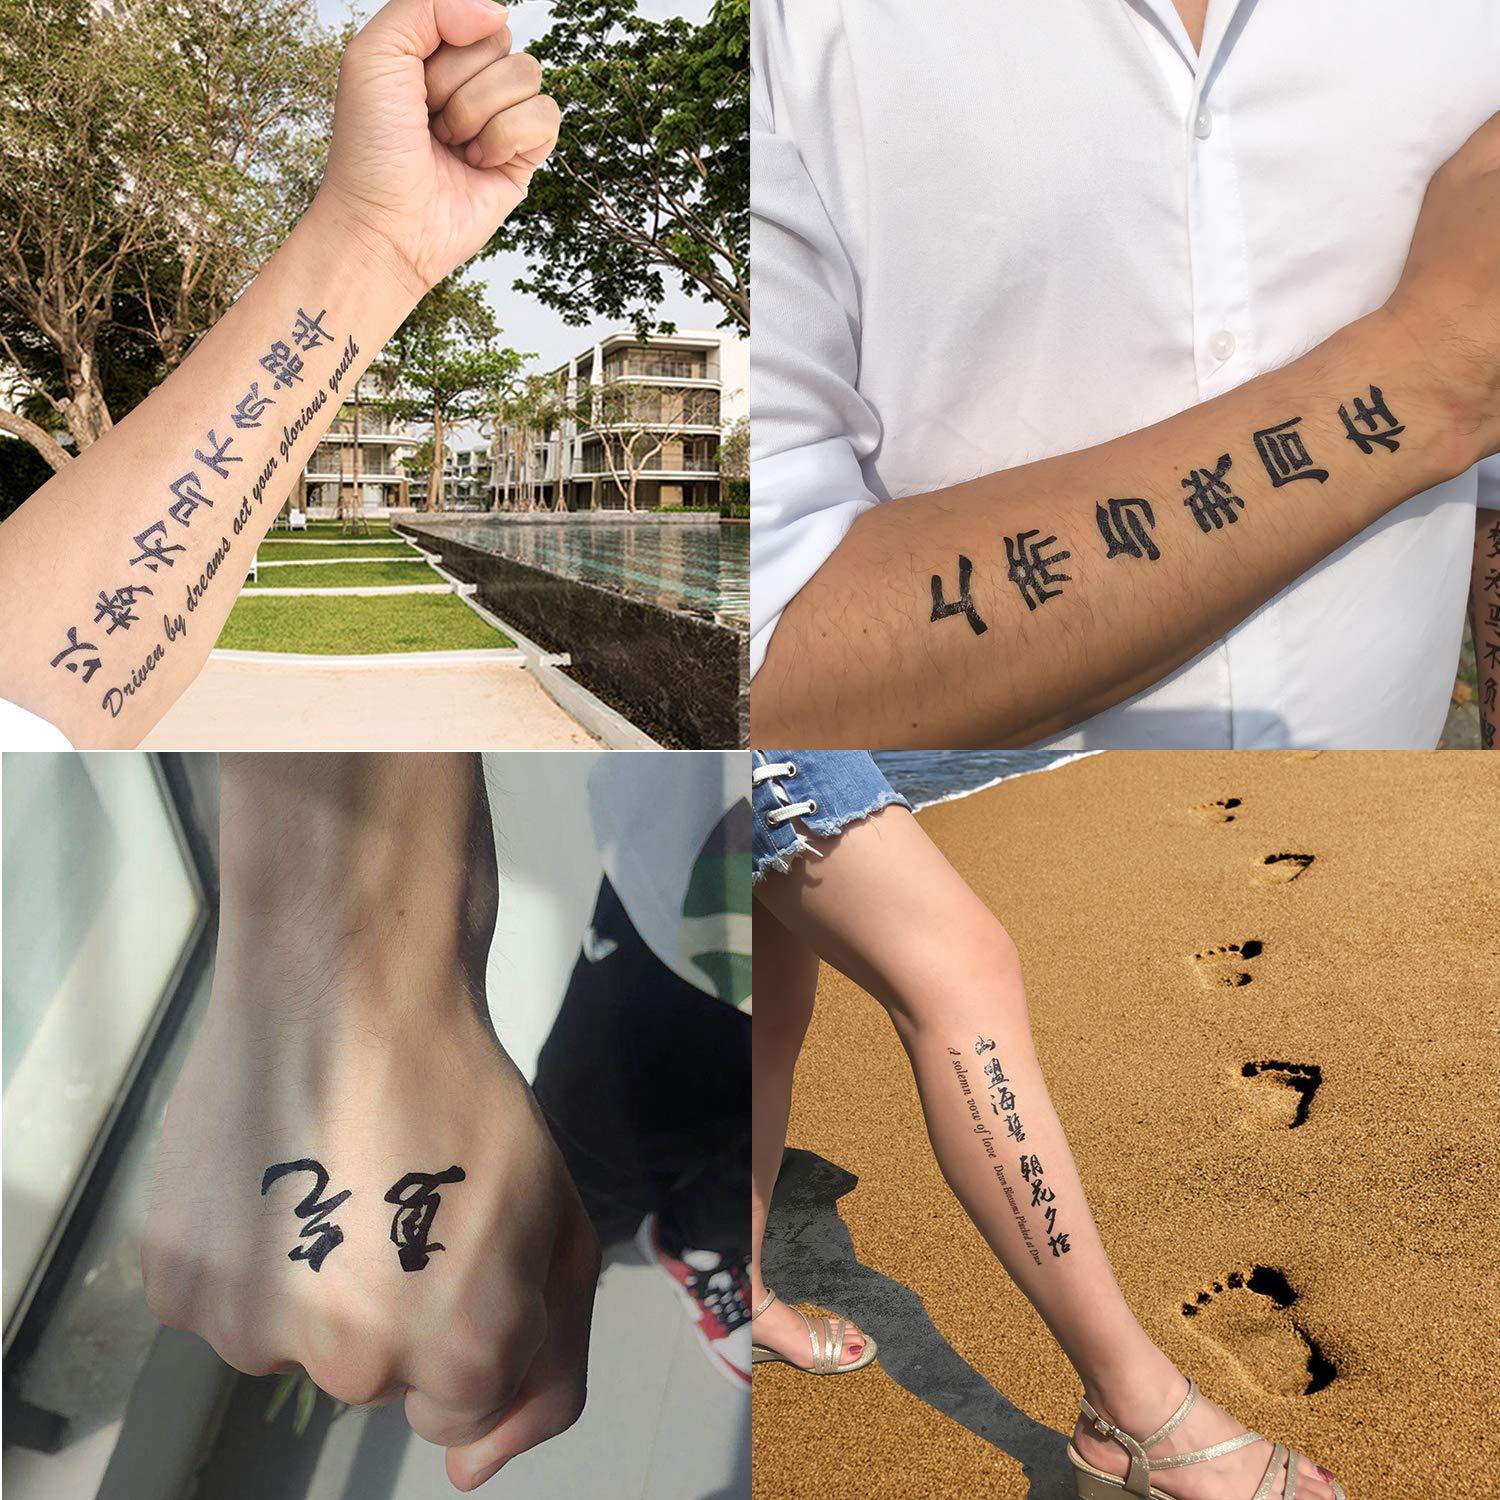 Tattoo ideas | Japanese tattoo words, Chinese writing tattoos, Meaningful  tattoo quotes